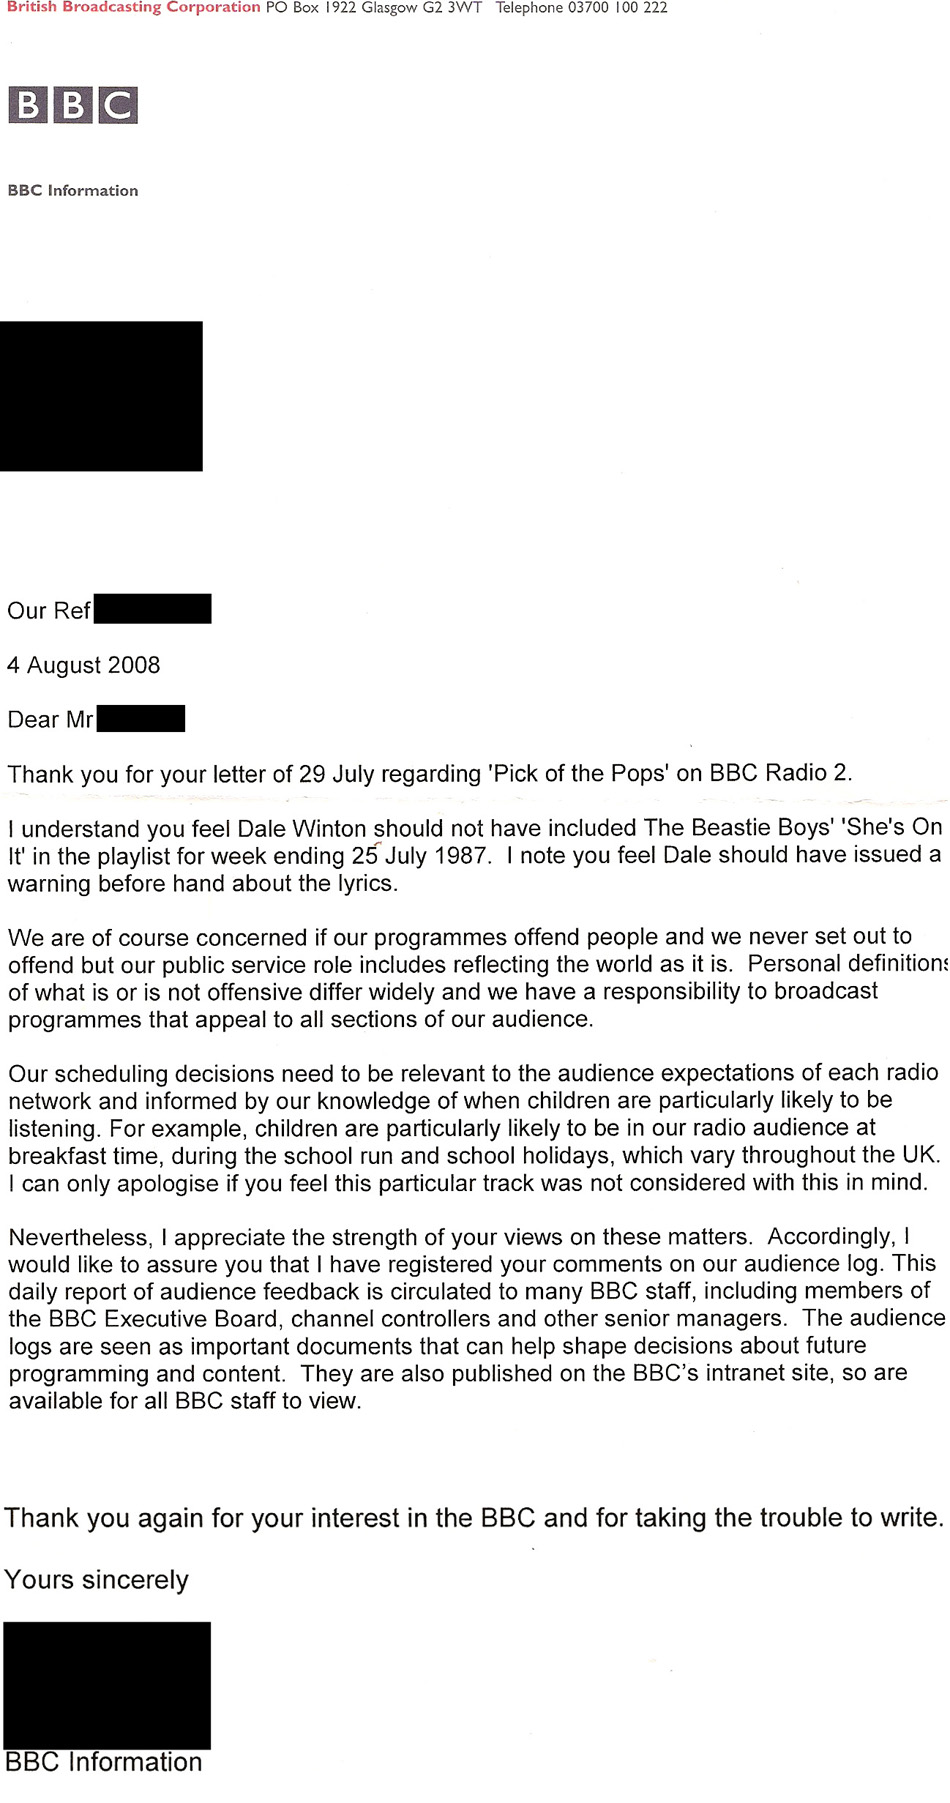 the BBC's bug letter